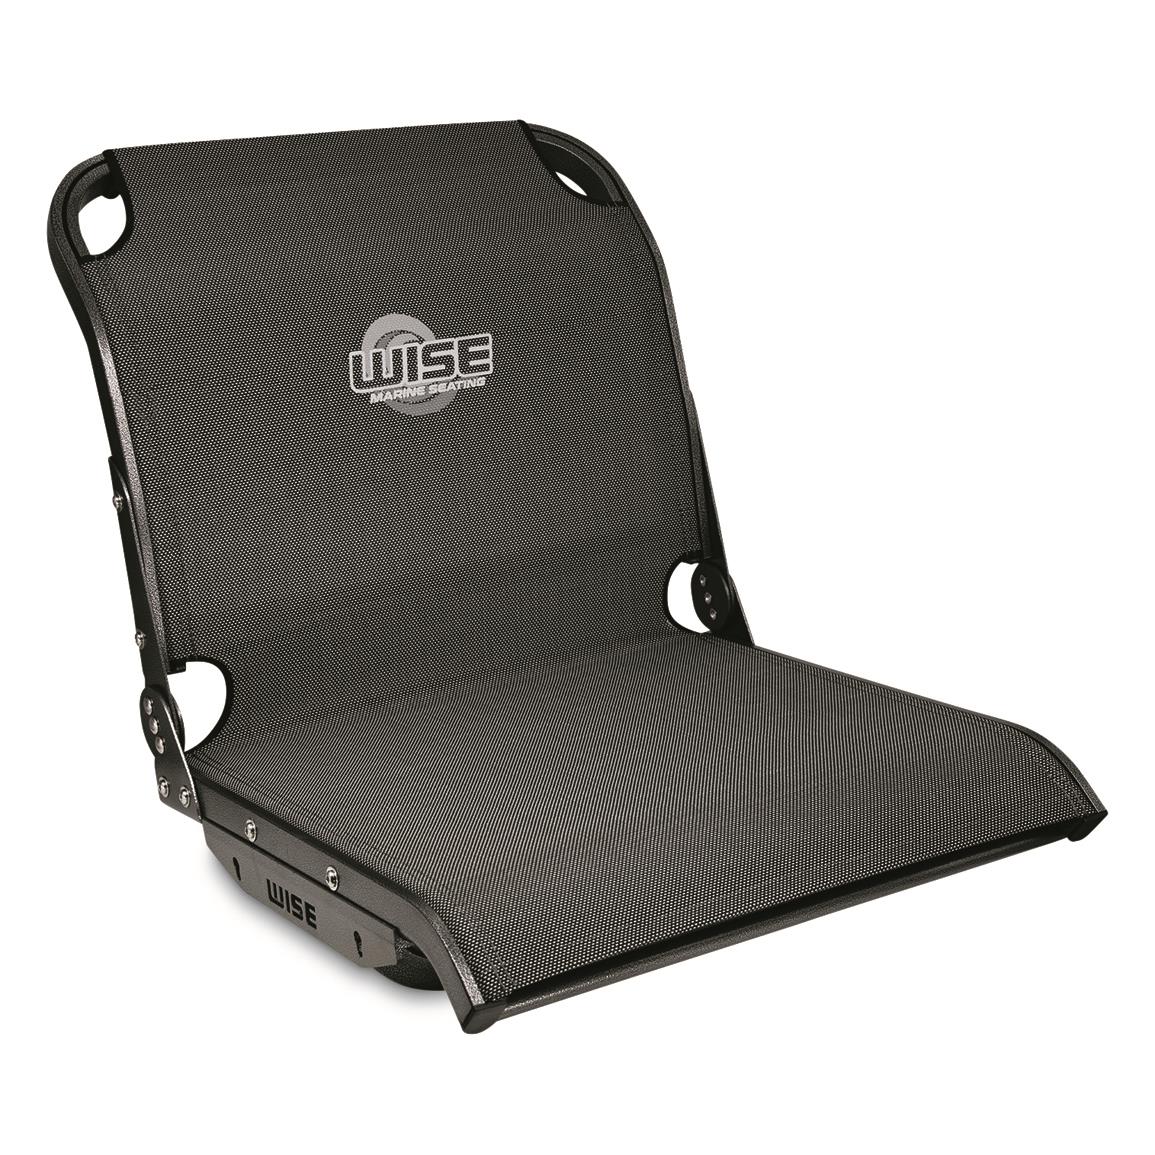 Wise AeroX Cool-Ride Mesh Mid Back Boat Seat, Carbon Gray